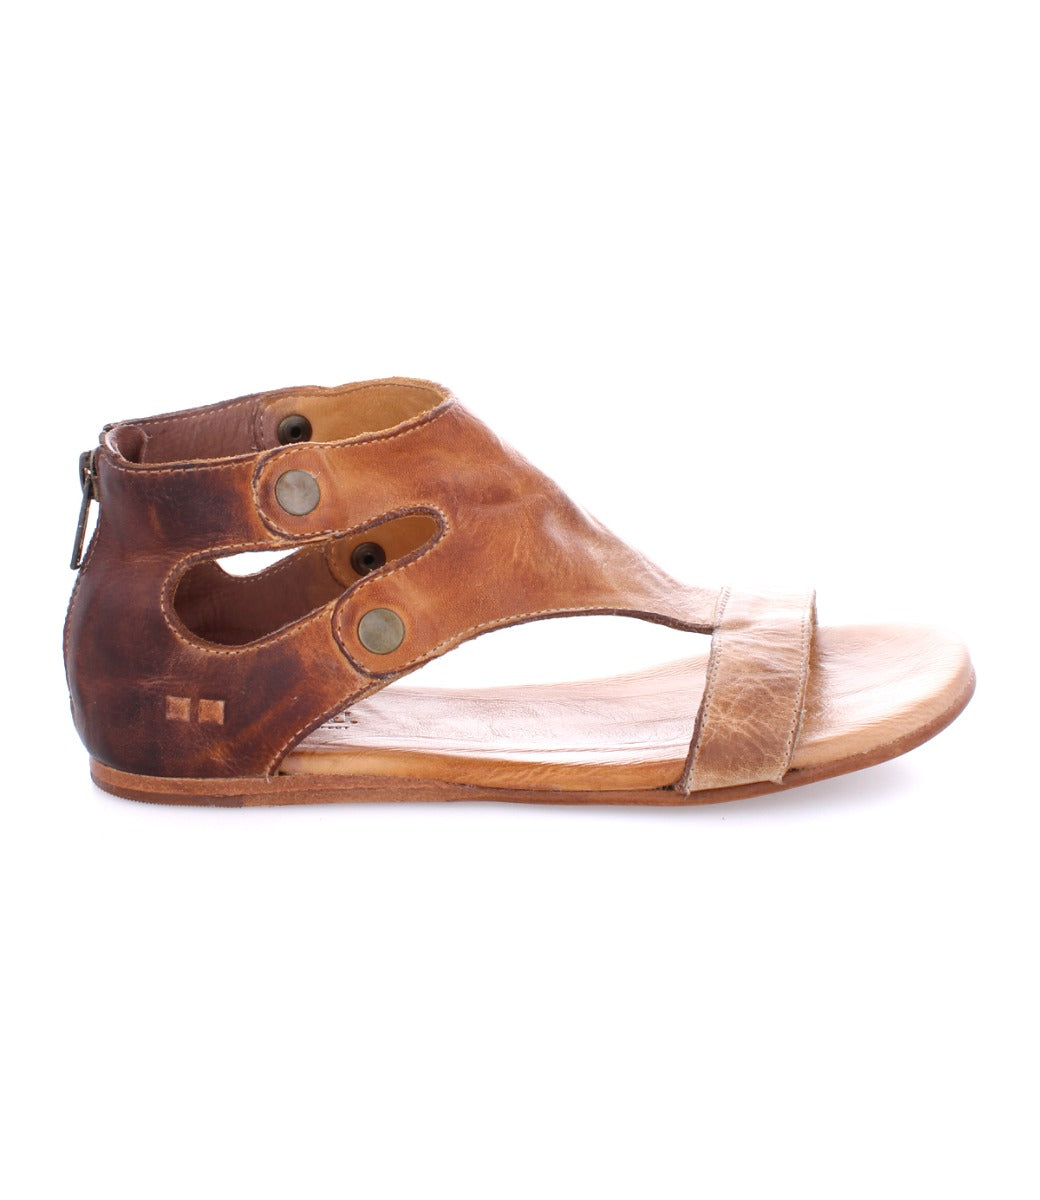 A women's brown leather sandal with two straps, the Soto by Bed Stu.